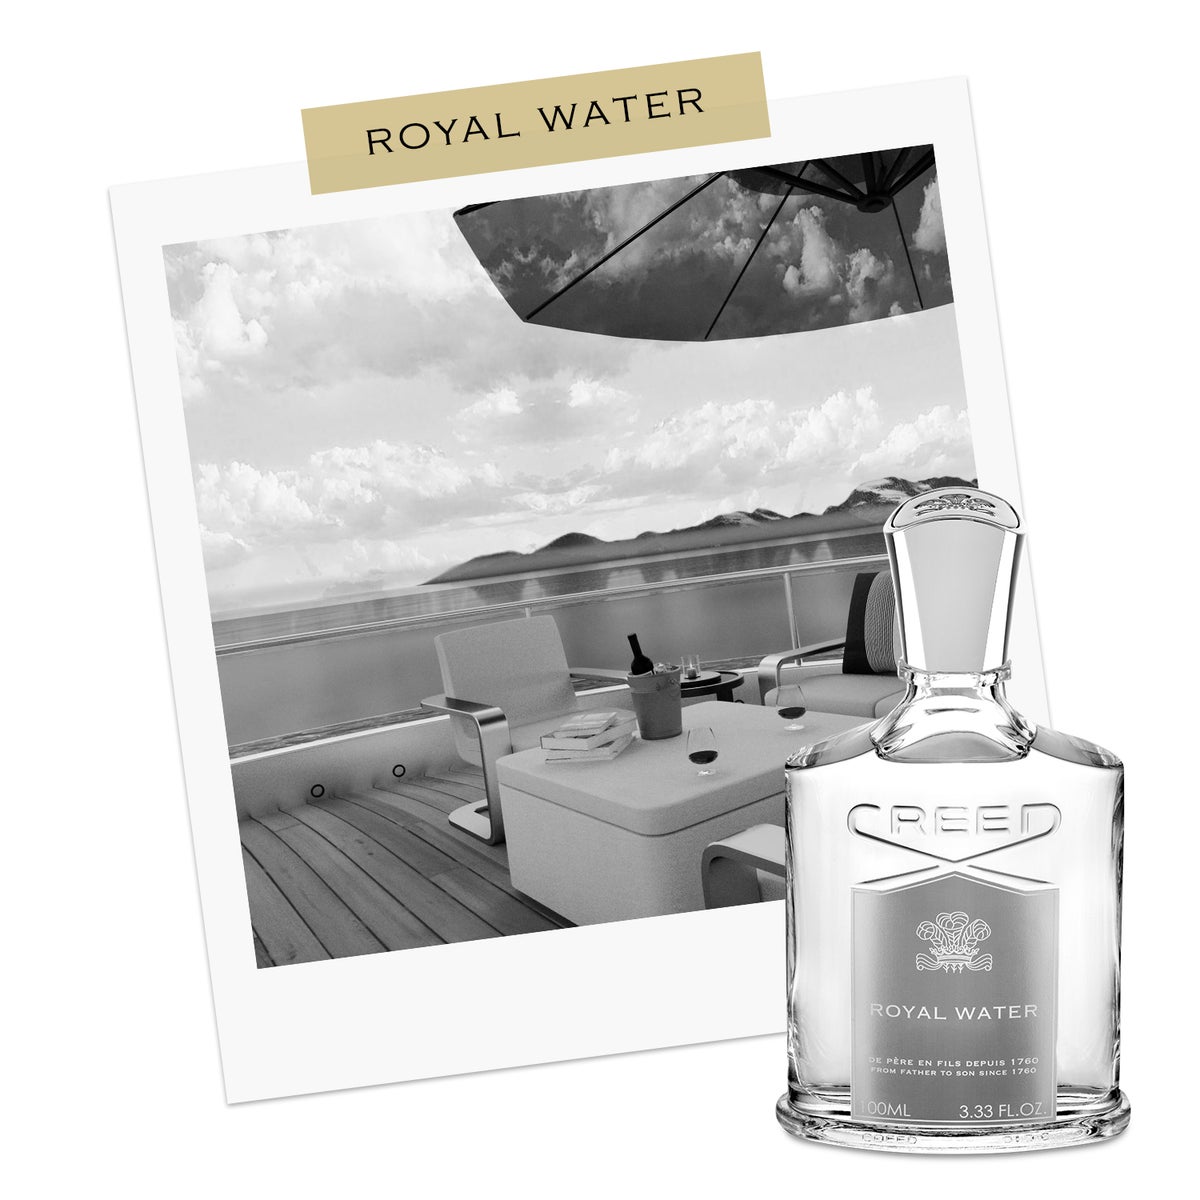 Royal Water bottle infront of black & white postcard of boat deck with wine in an ice bucket overlooking the Mediterranean Sea